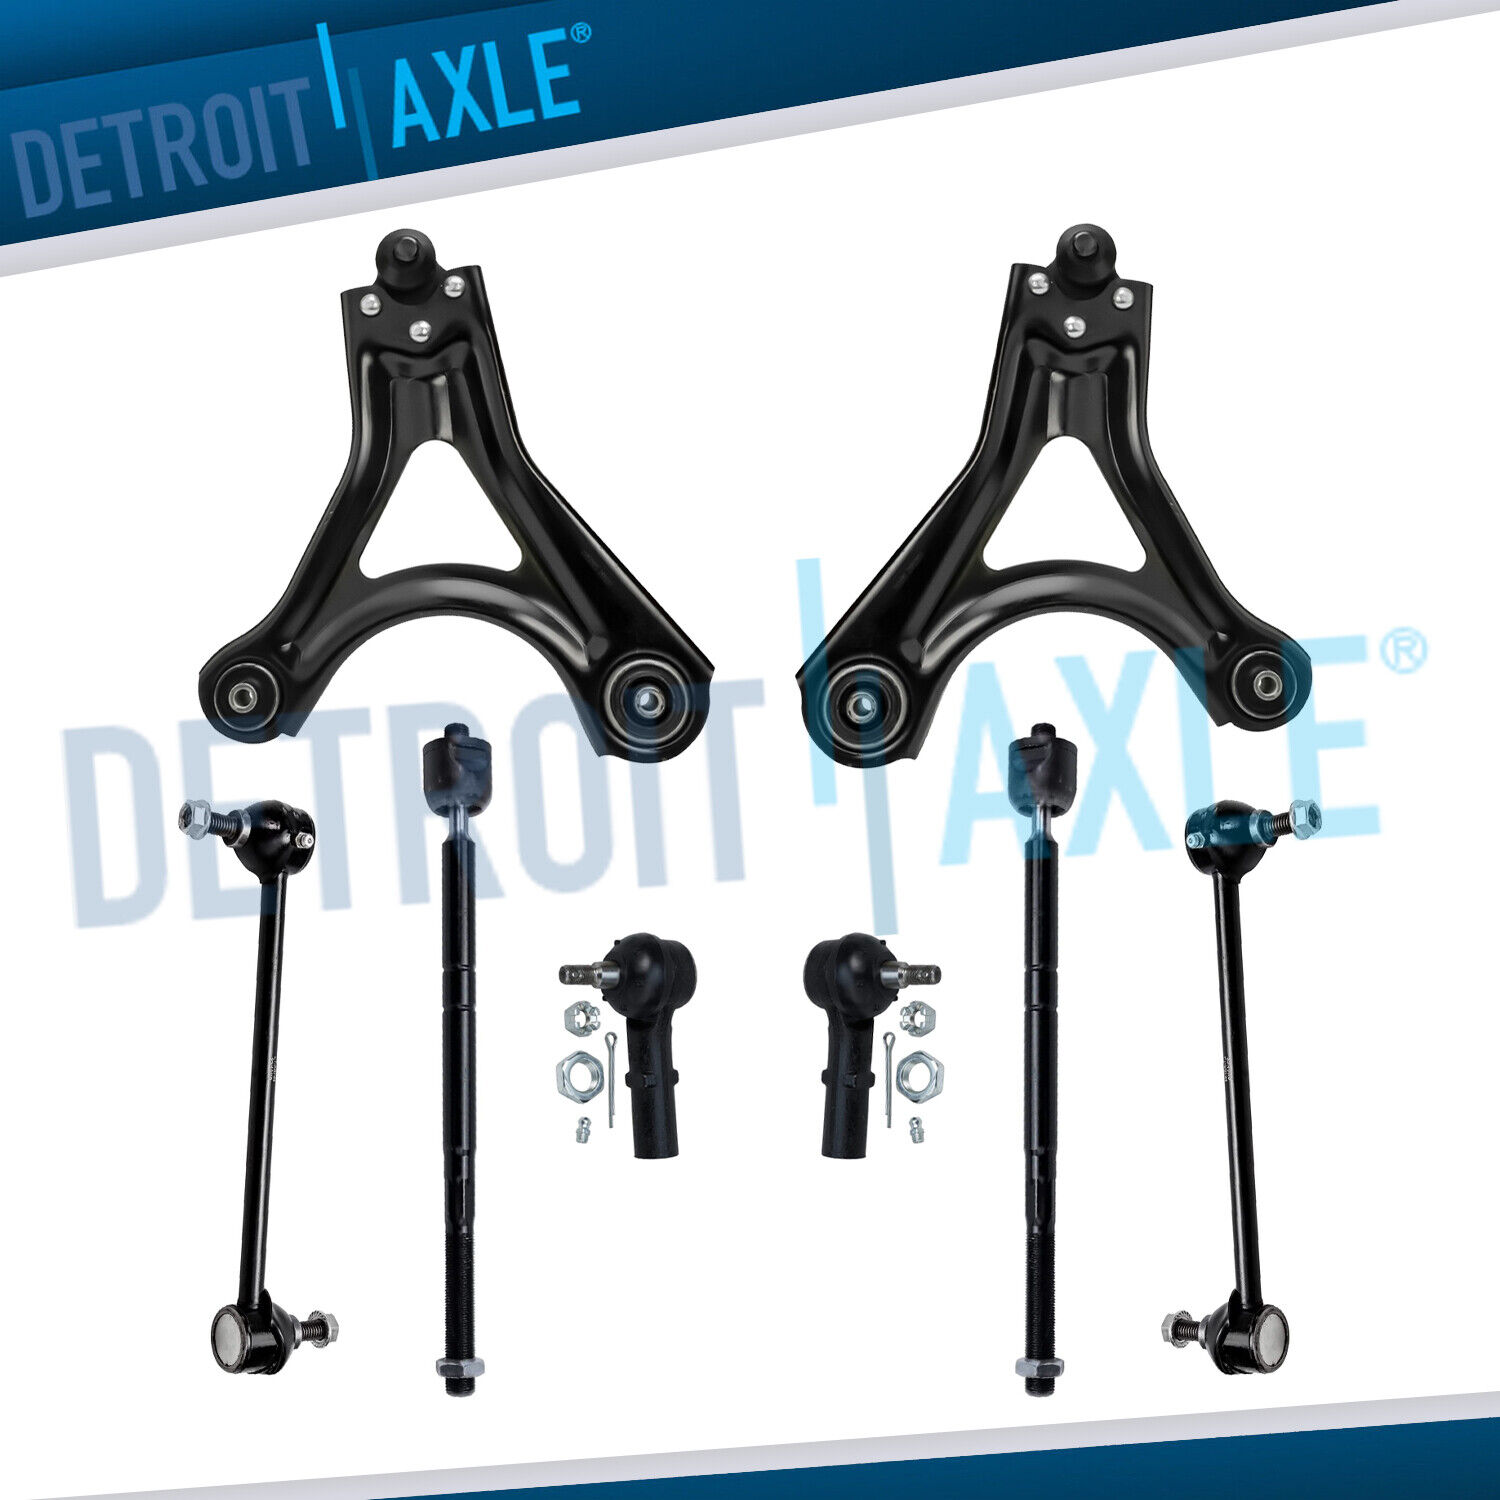 New 8pc Complete Front Control Arm + Suspension Kit For Ford Contour 1998-2000